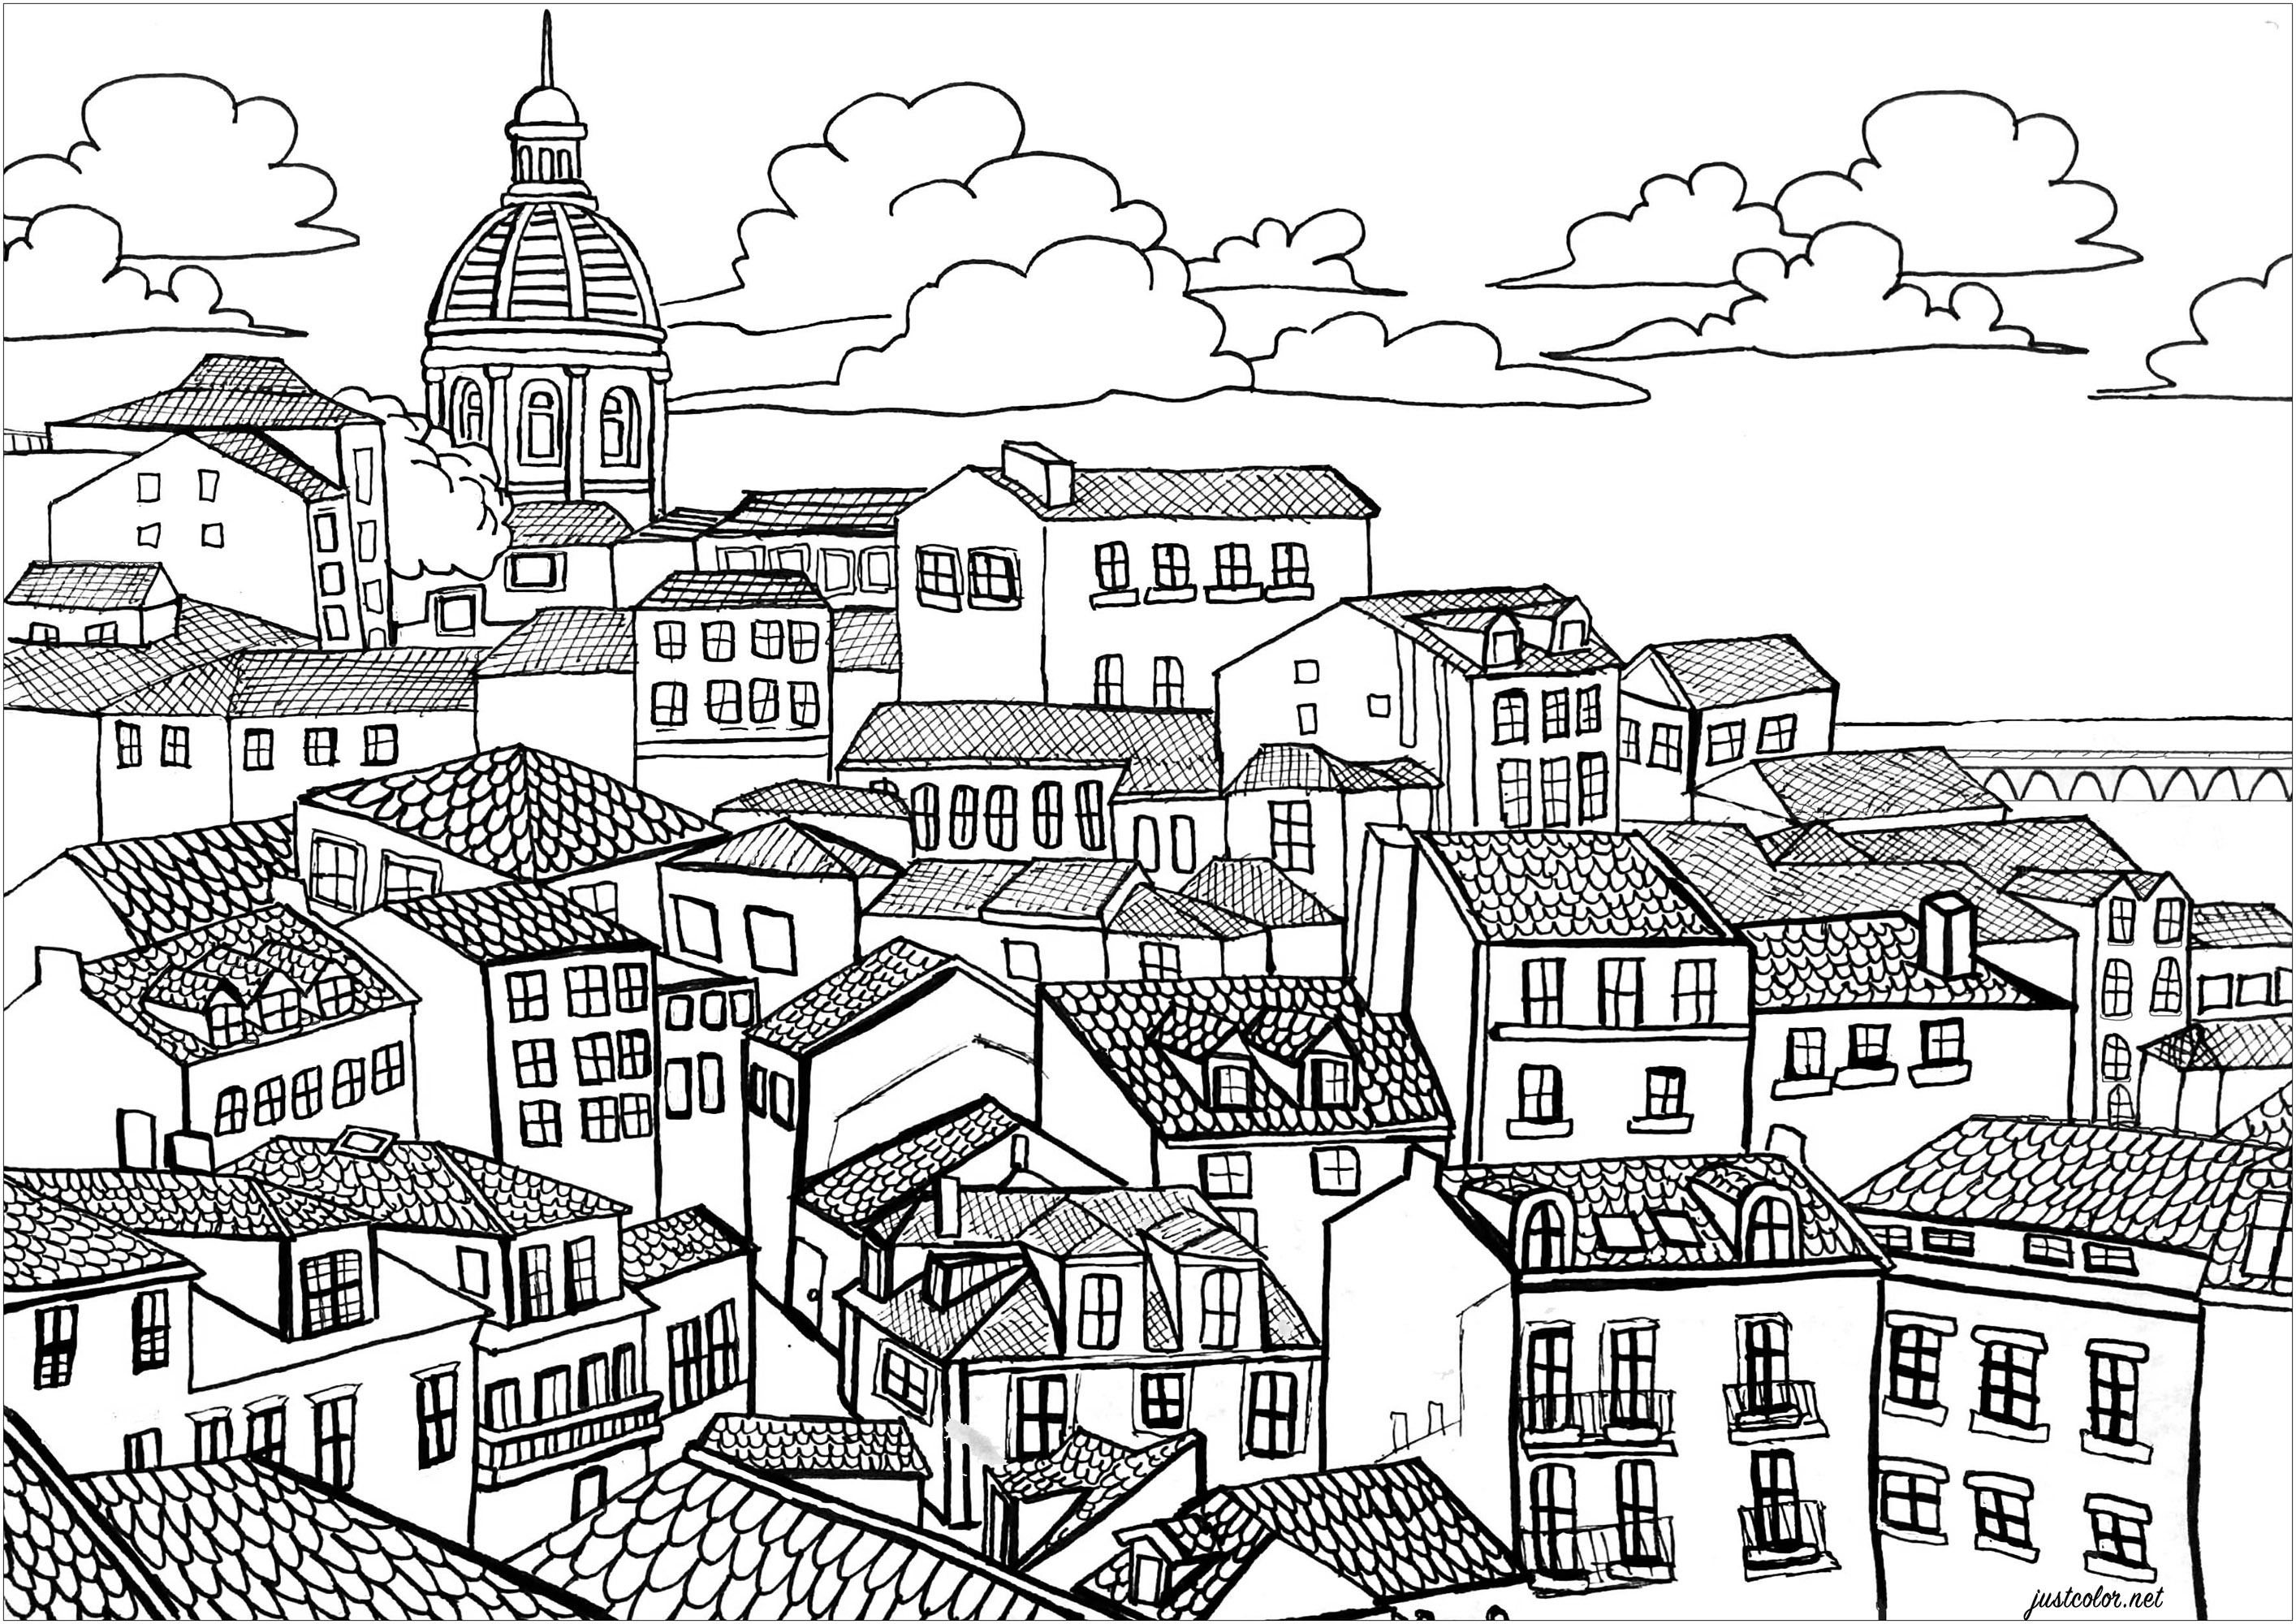 A view over the rooftops of the Alfama district : a true pleasure for the eyes.  A nice coloring page representing one of the most pleasant districts to visit in Lisbon ! A labyrinth of alleys and small sloping streets that descend towards the Tagus. The Vasco da Gama bridge can be seen far away on the Tagus River.